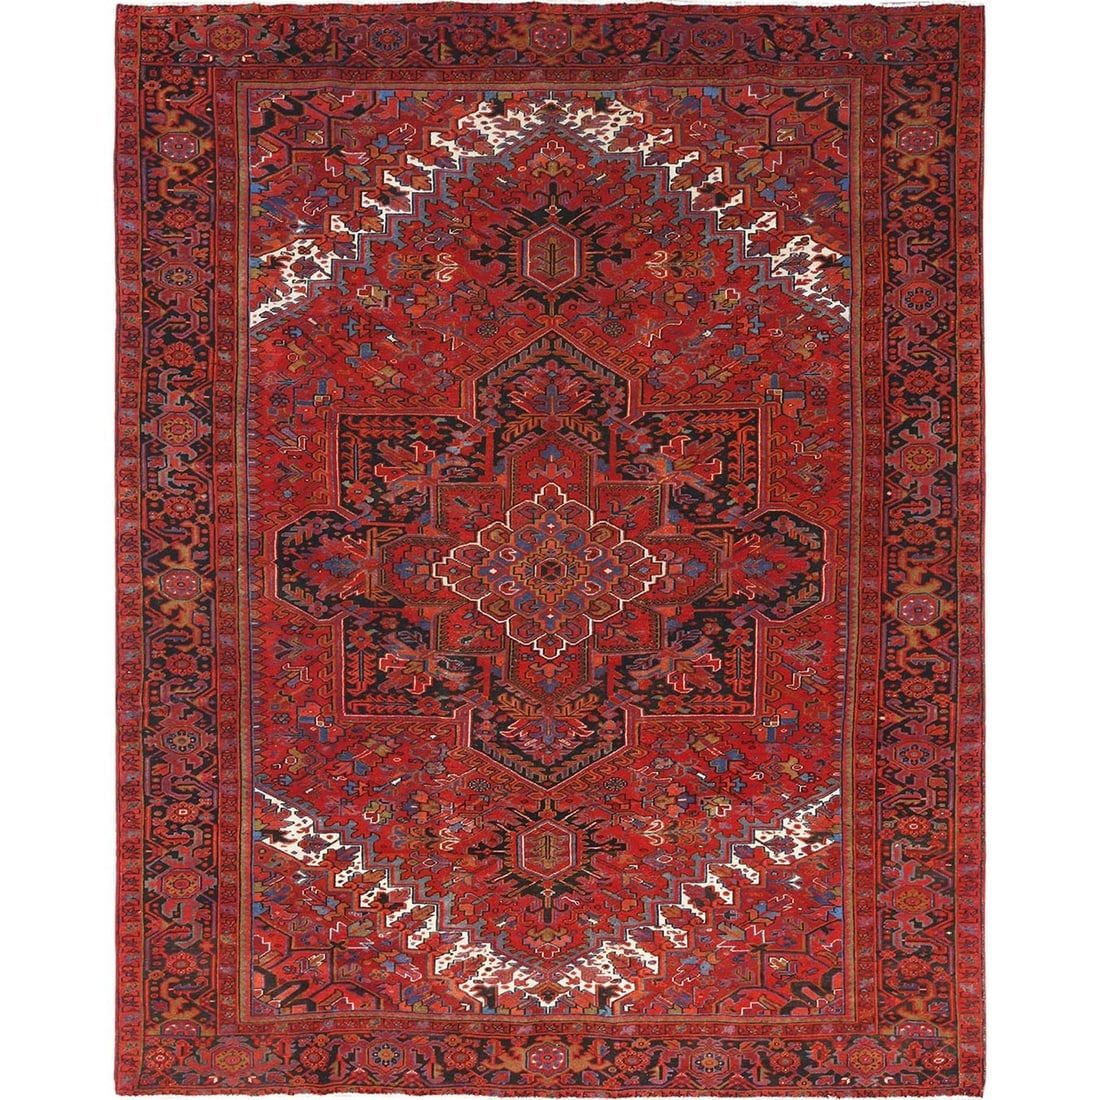 Jasper52 presents Woven in Time: Antique and Vintage Rugs March 6